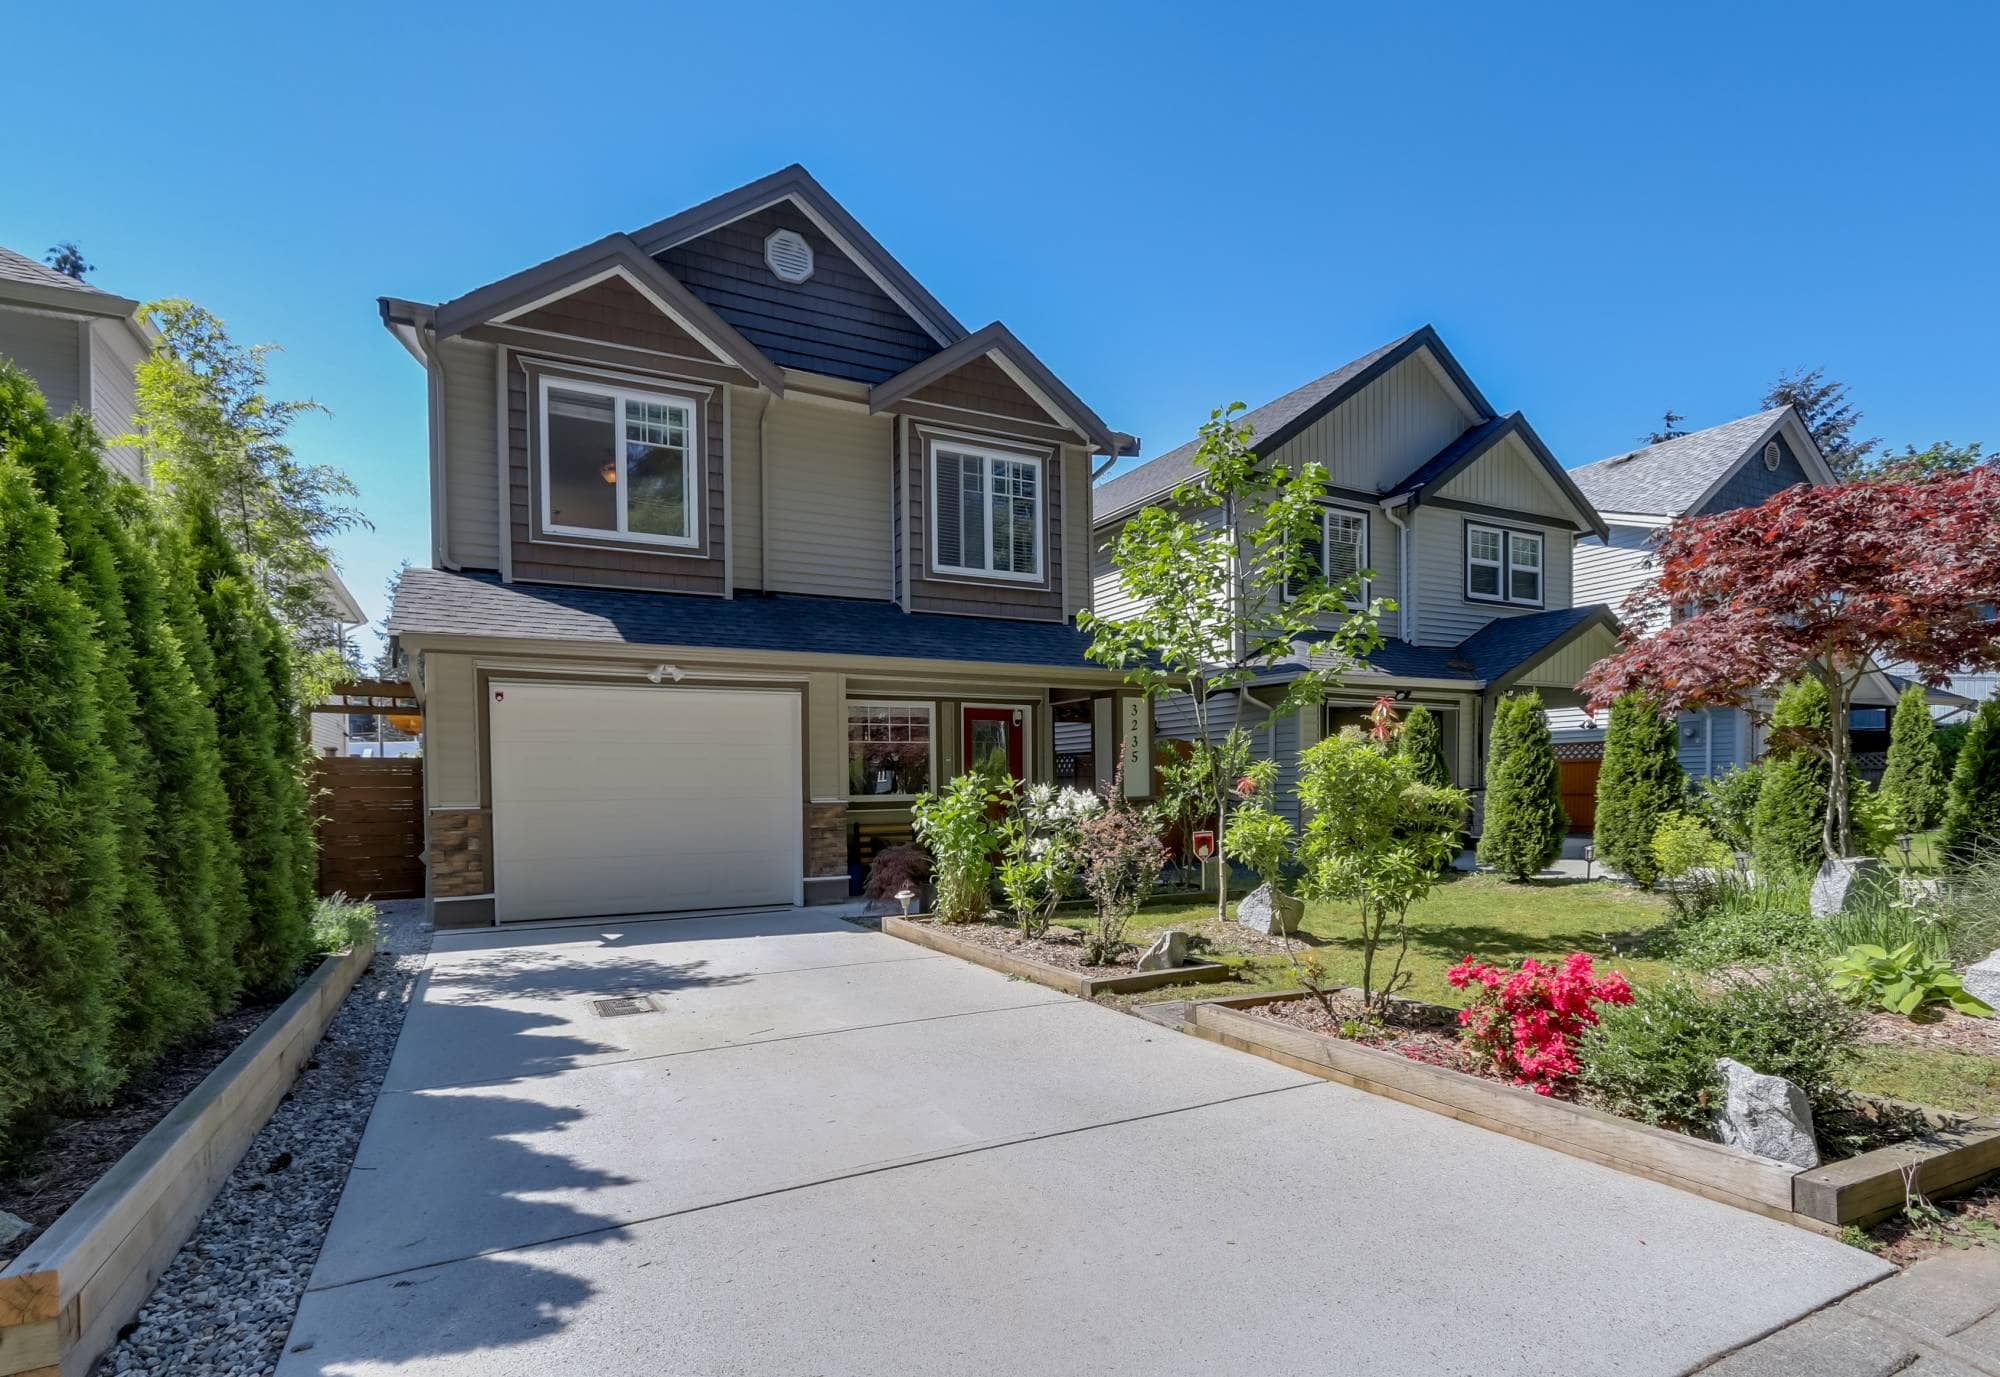 6 Bedroom Home in Central Port Coquitlam